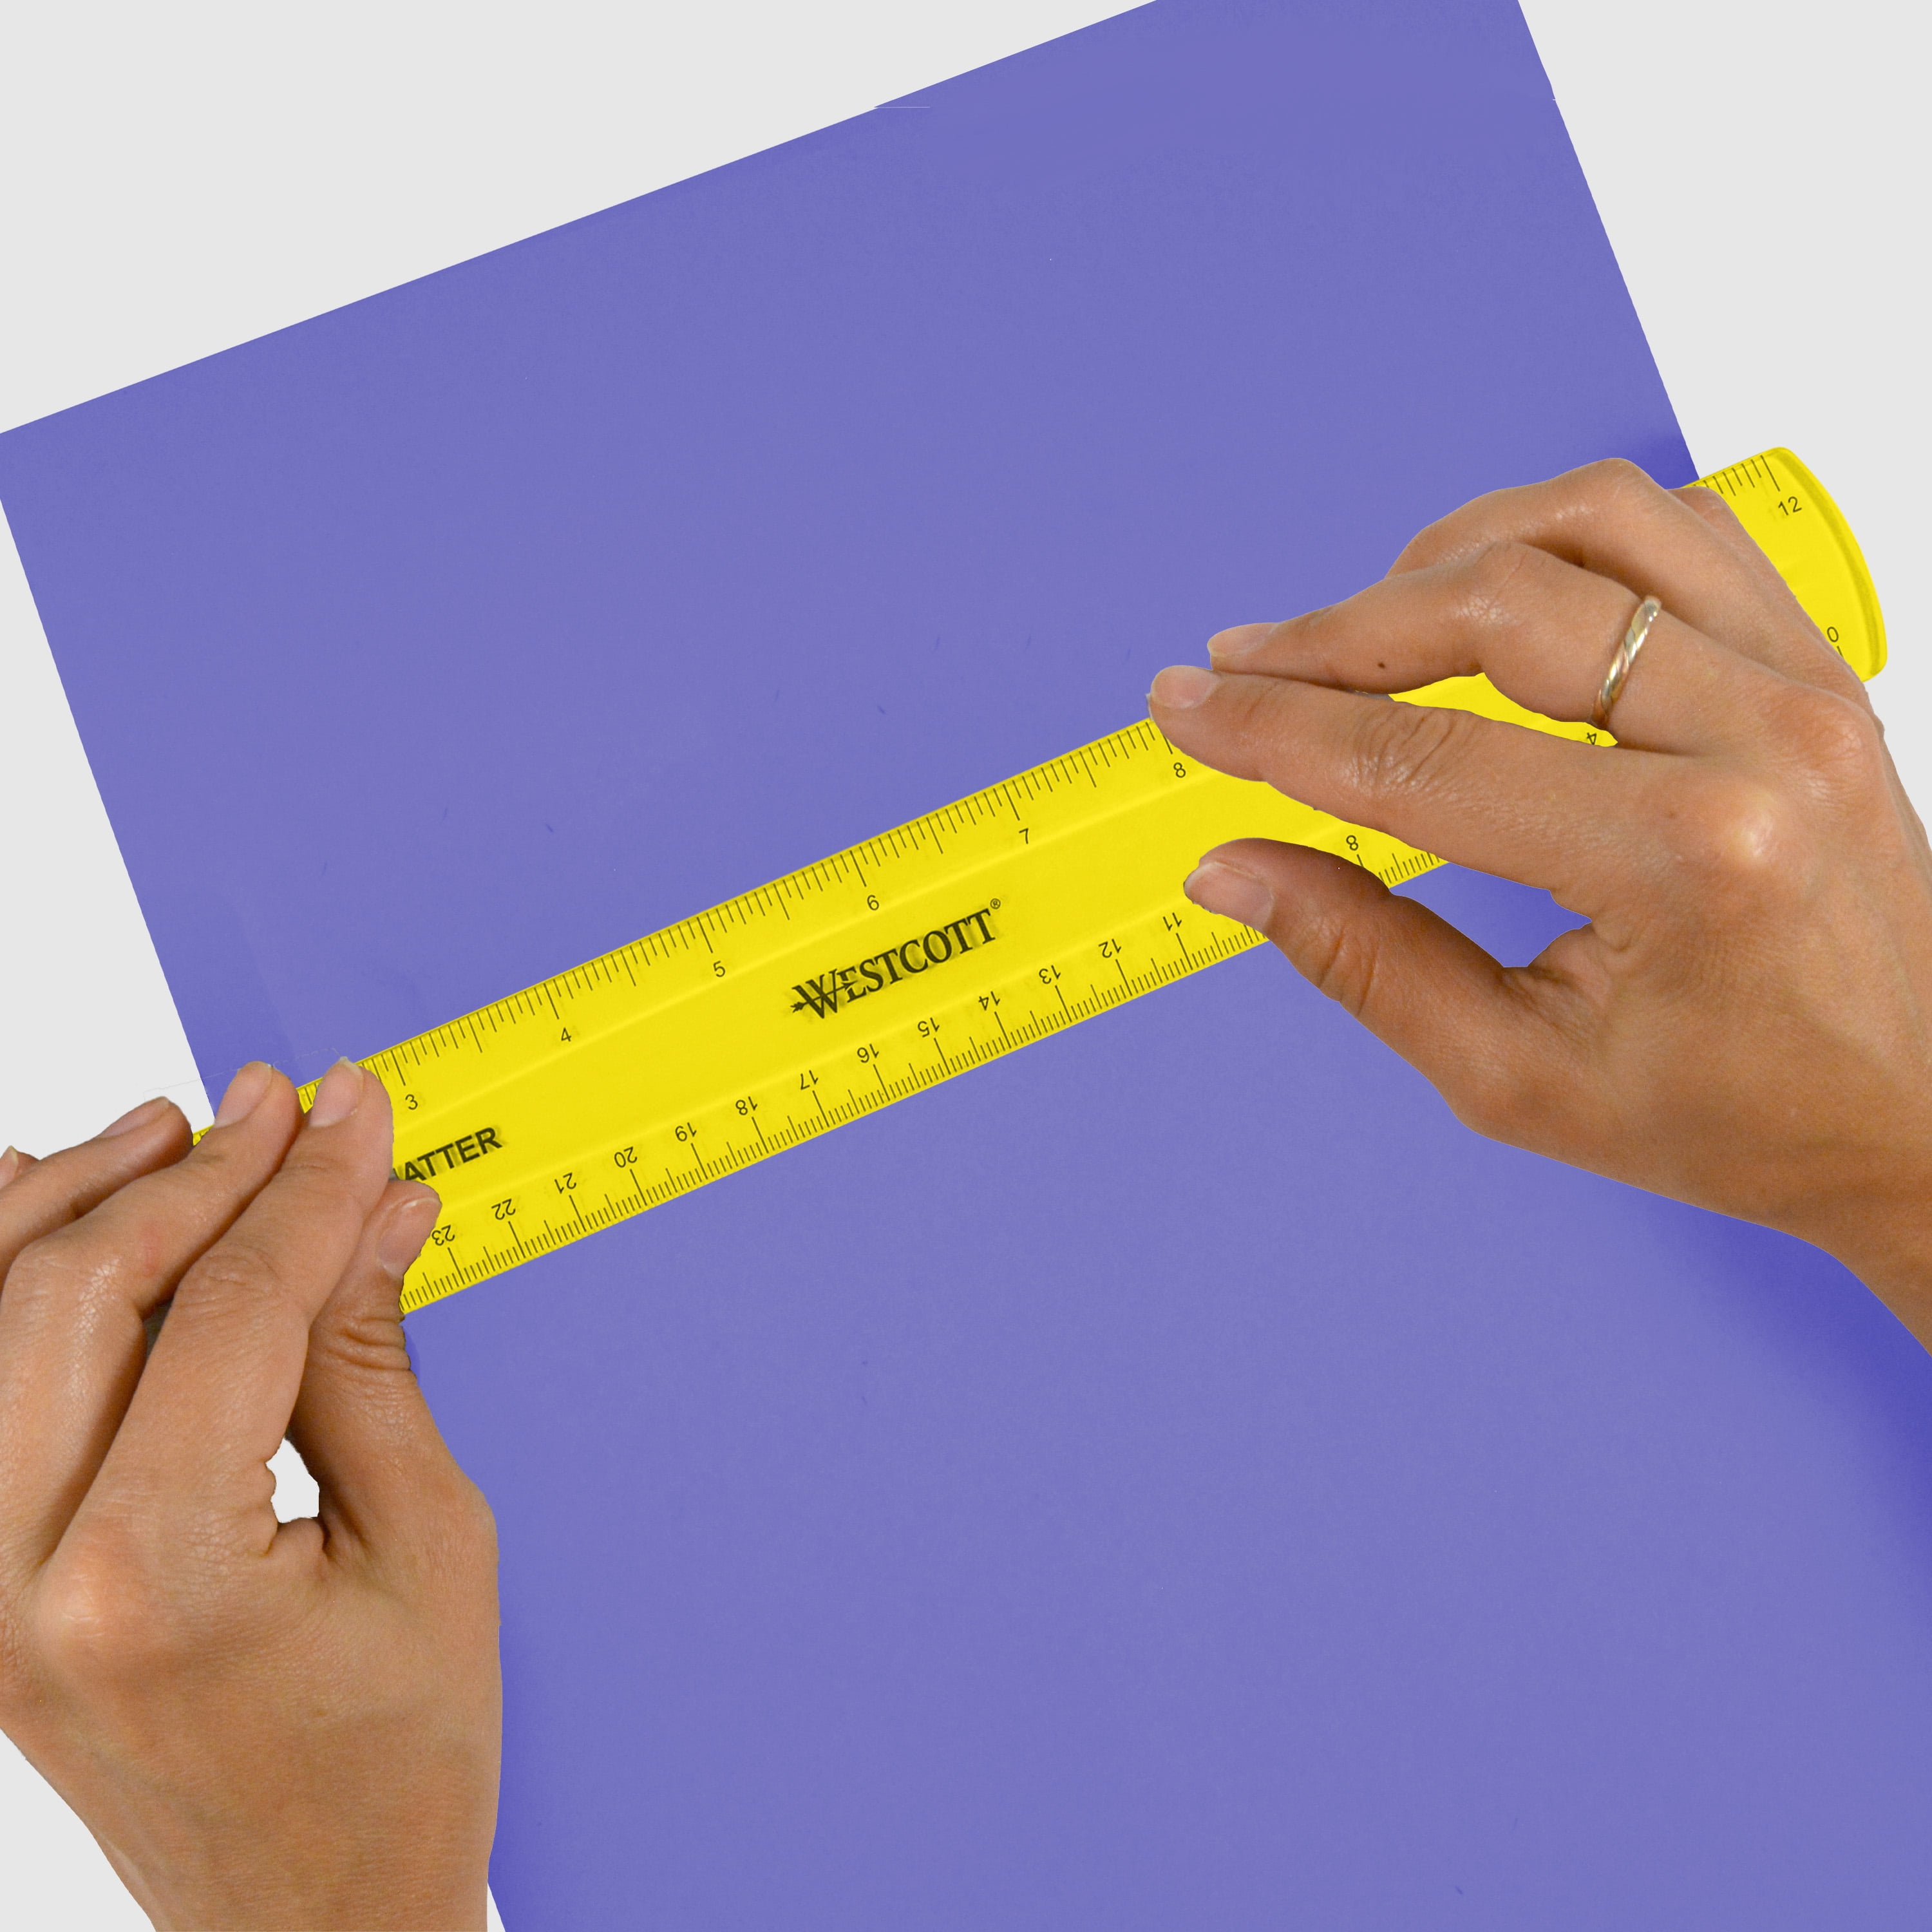 Westcott 12 English and Metric Shatterproof Ruler, Clear (45011)